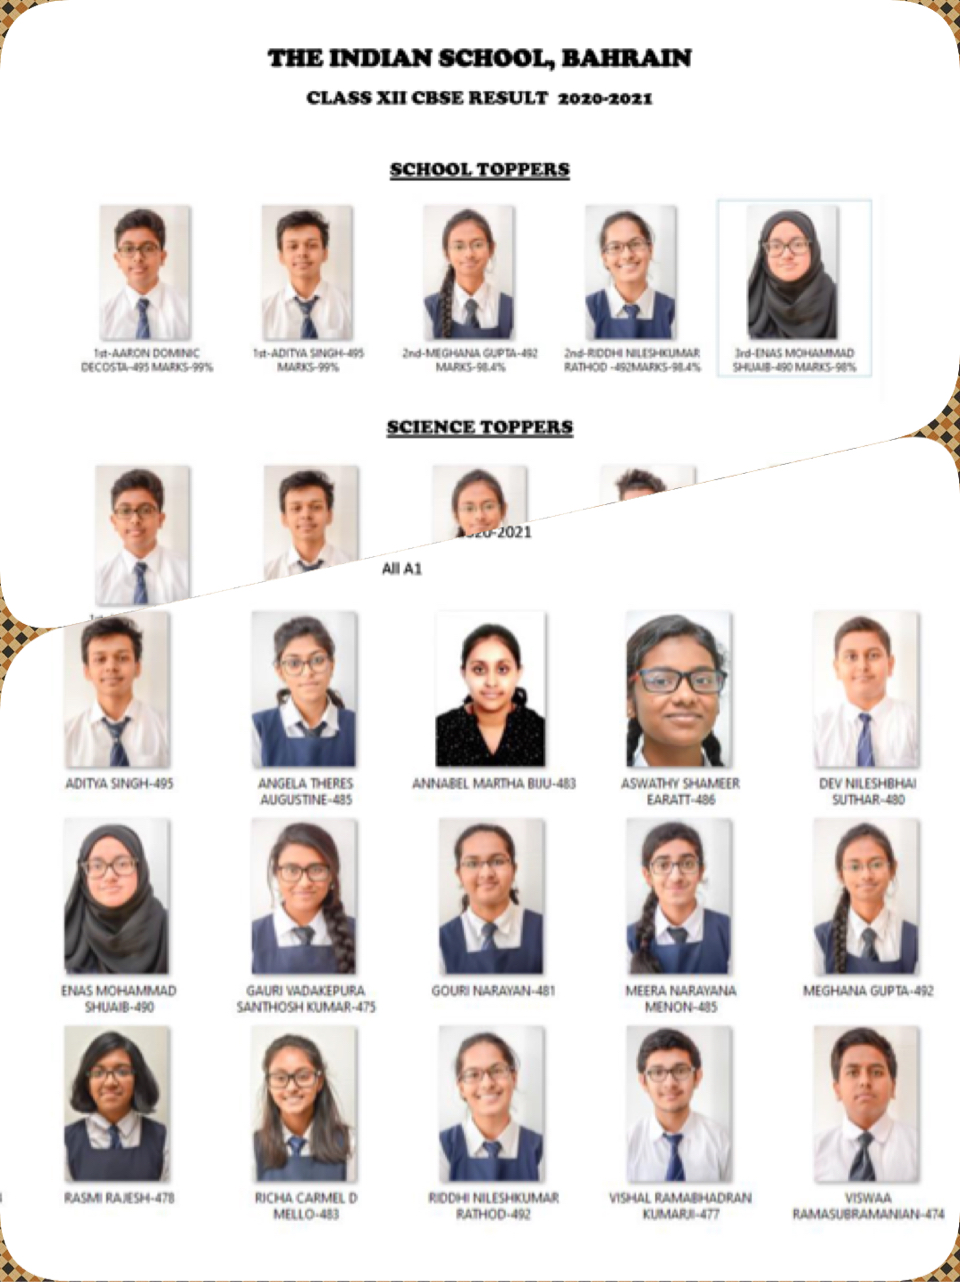 CBSE Class XII Results 2020-2021